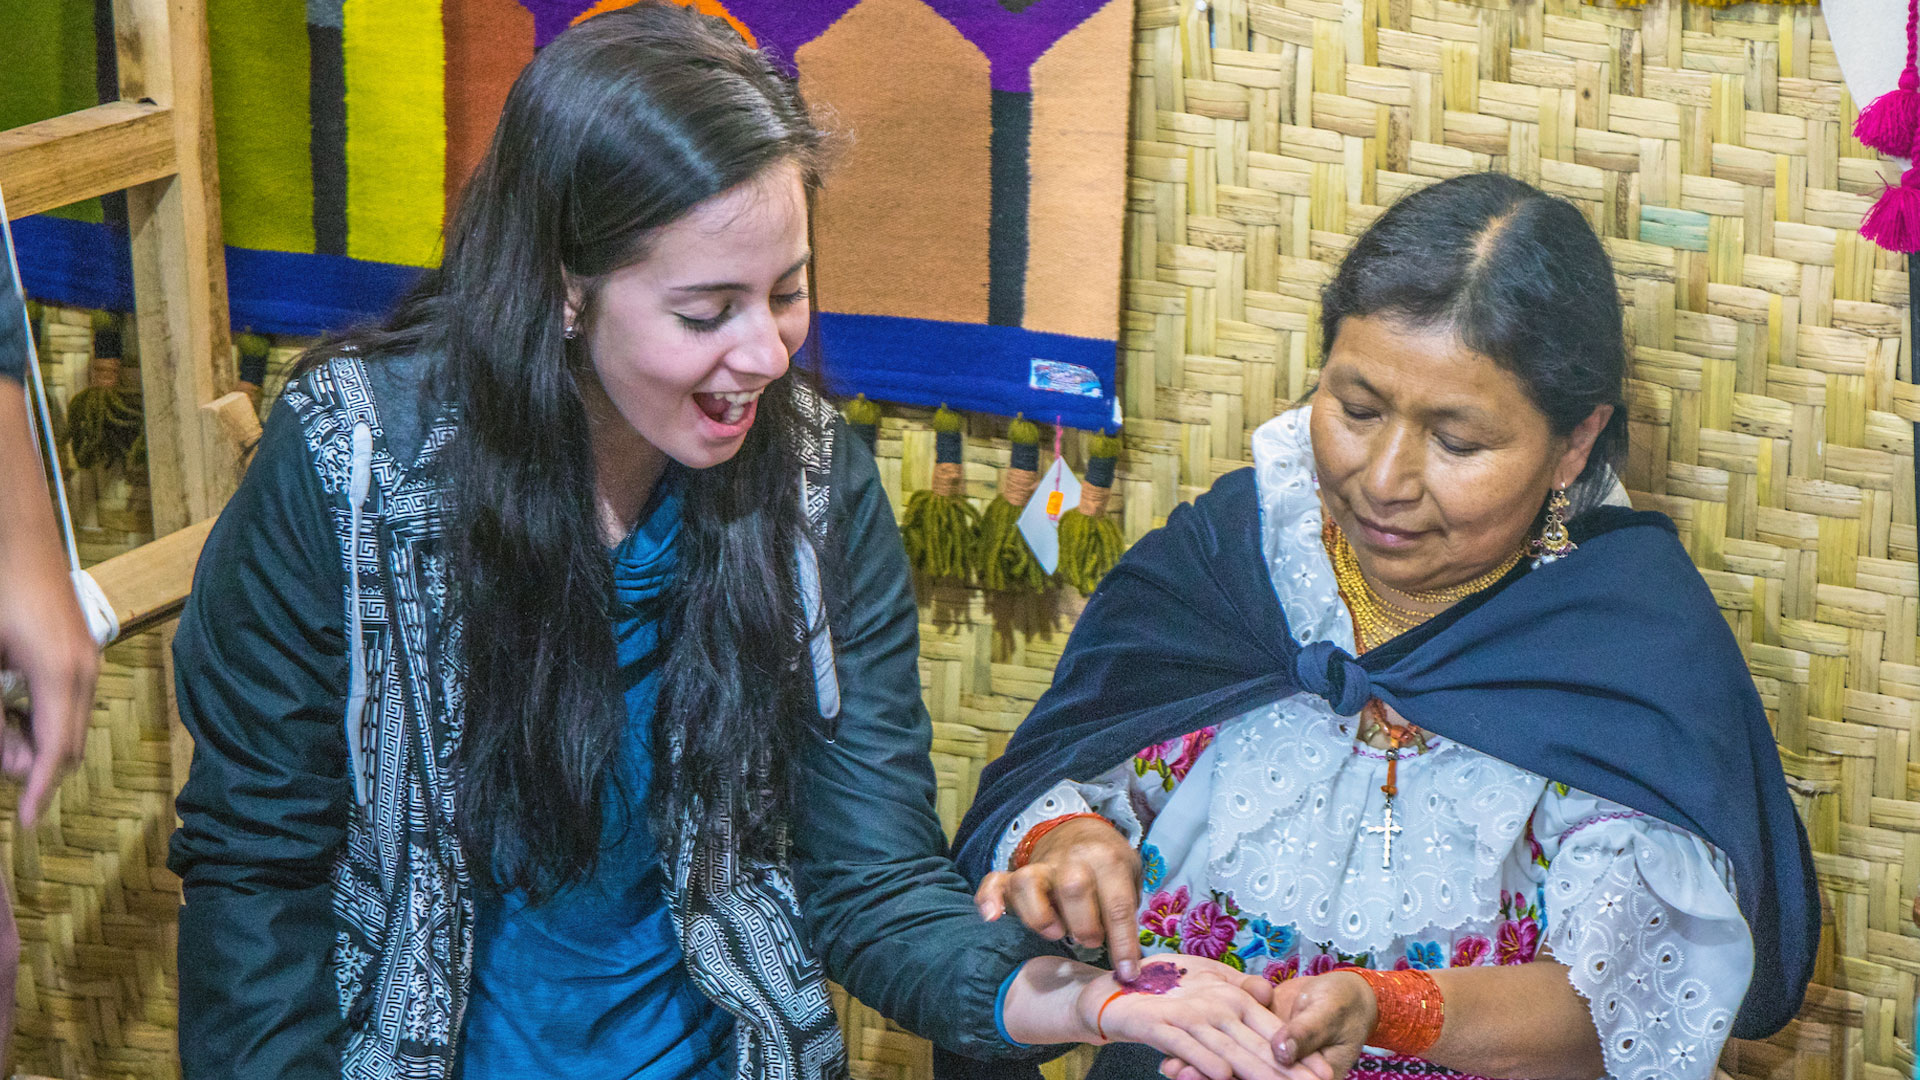 A JWU student gets her hand painted in a traditional folk art style in Ecuador